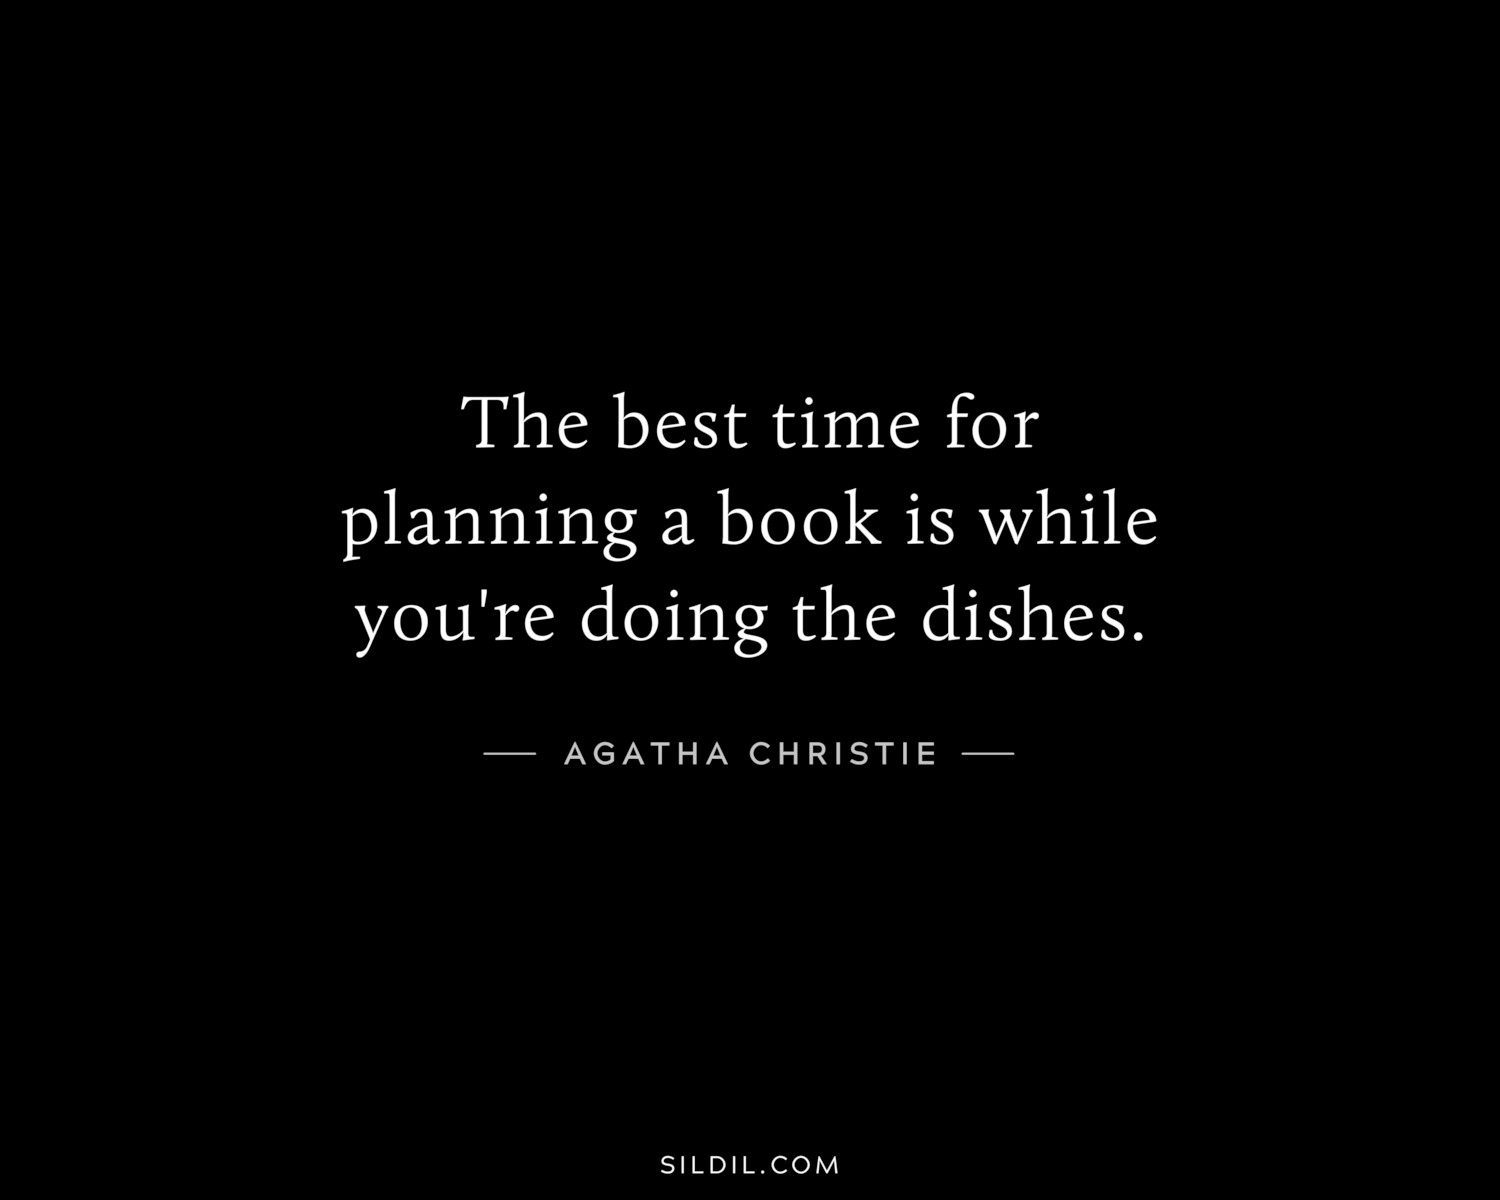 The best time for planning a book is while you're doing the dishes.